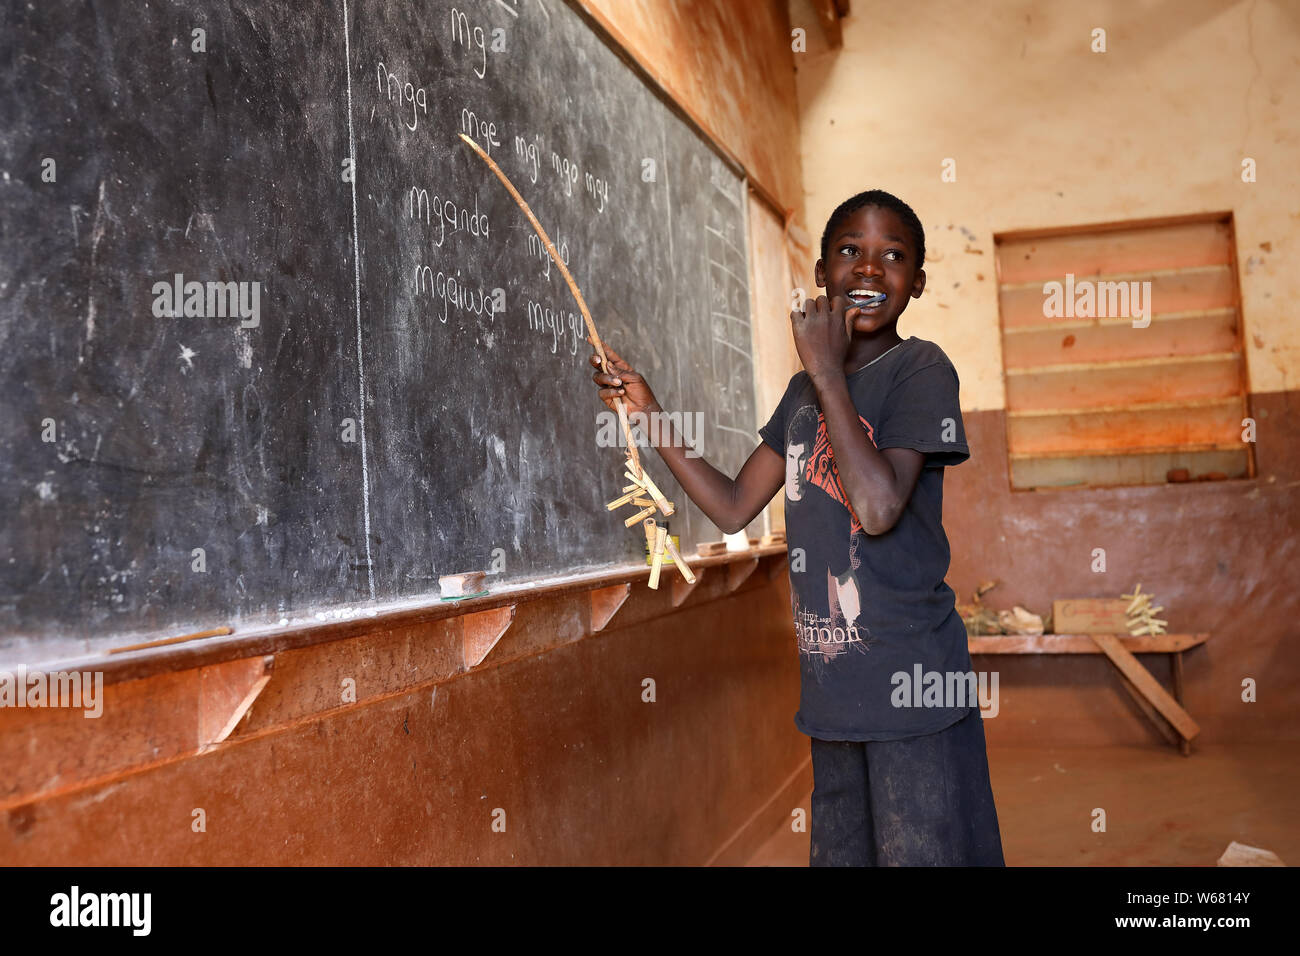 Student in a classroom of a primary school in a remote village near Ntchisi, Malawi. Malawi is one of the poorest countries in the world. Stock Photo